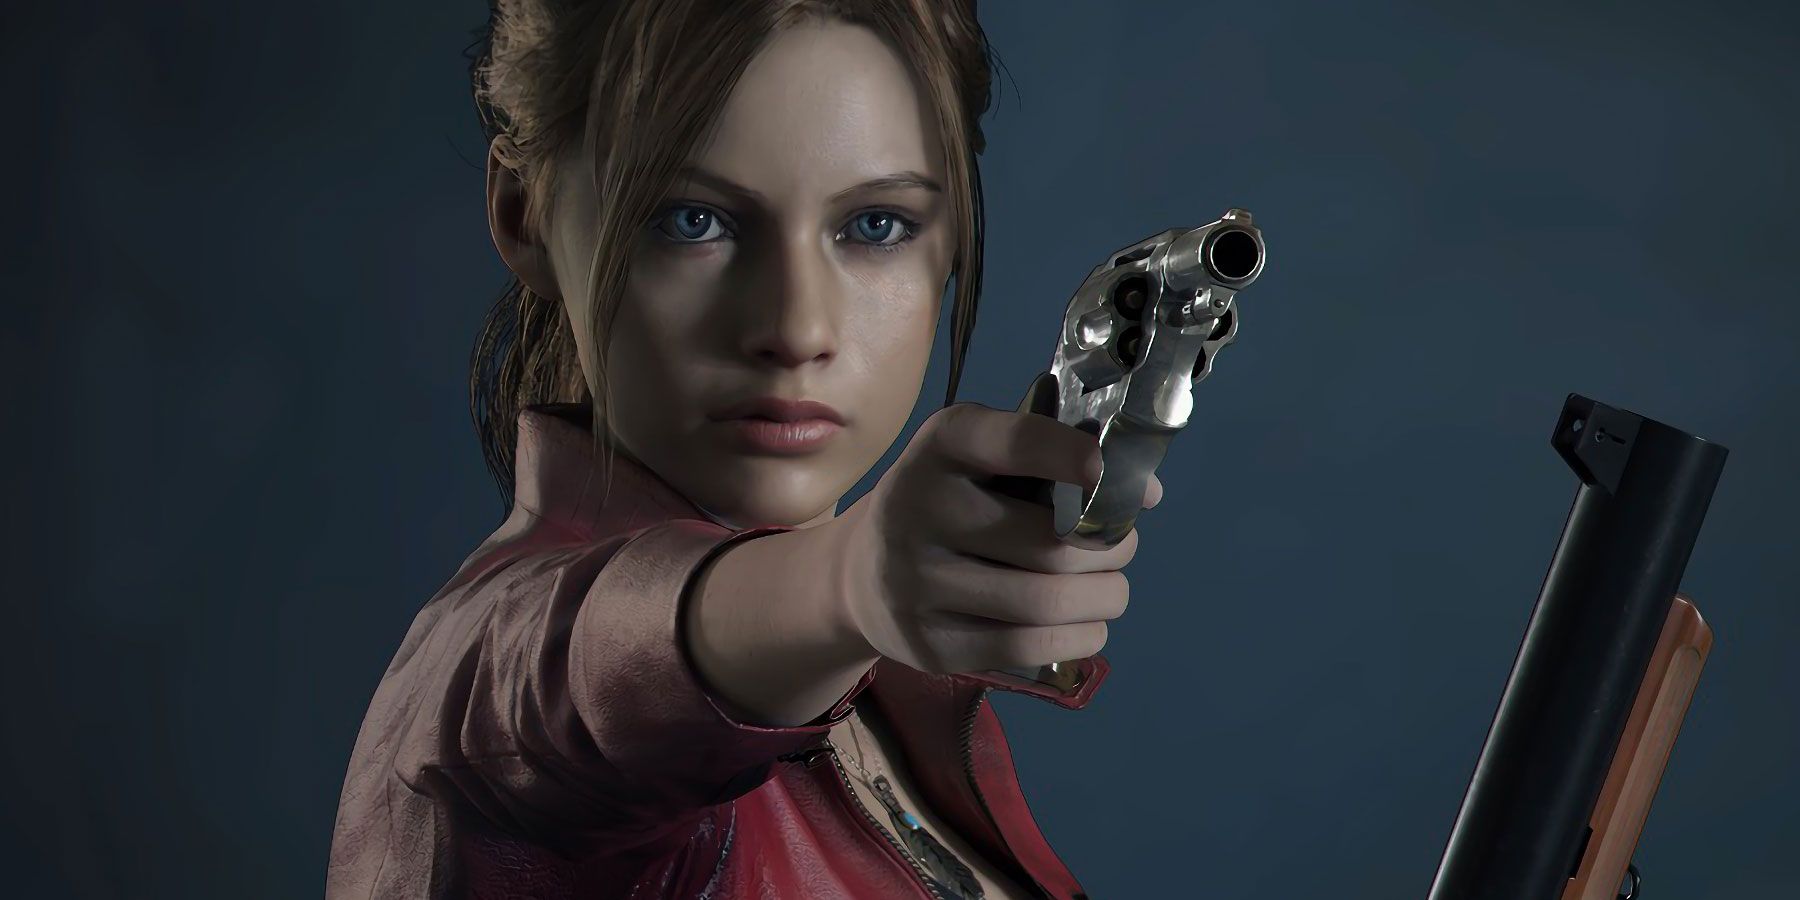 Claire Redfield wielding a gun in the Resident Evil 2 remake.